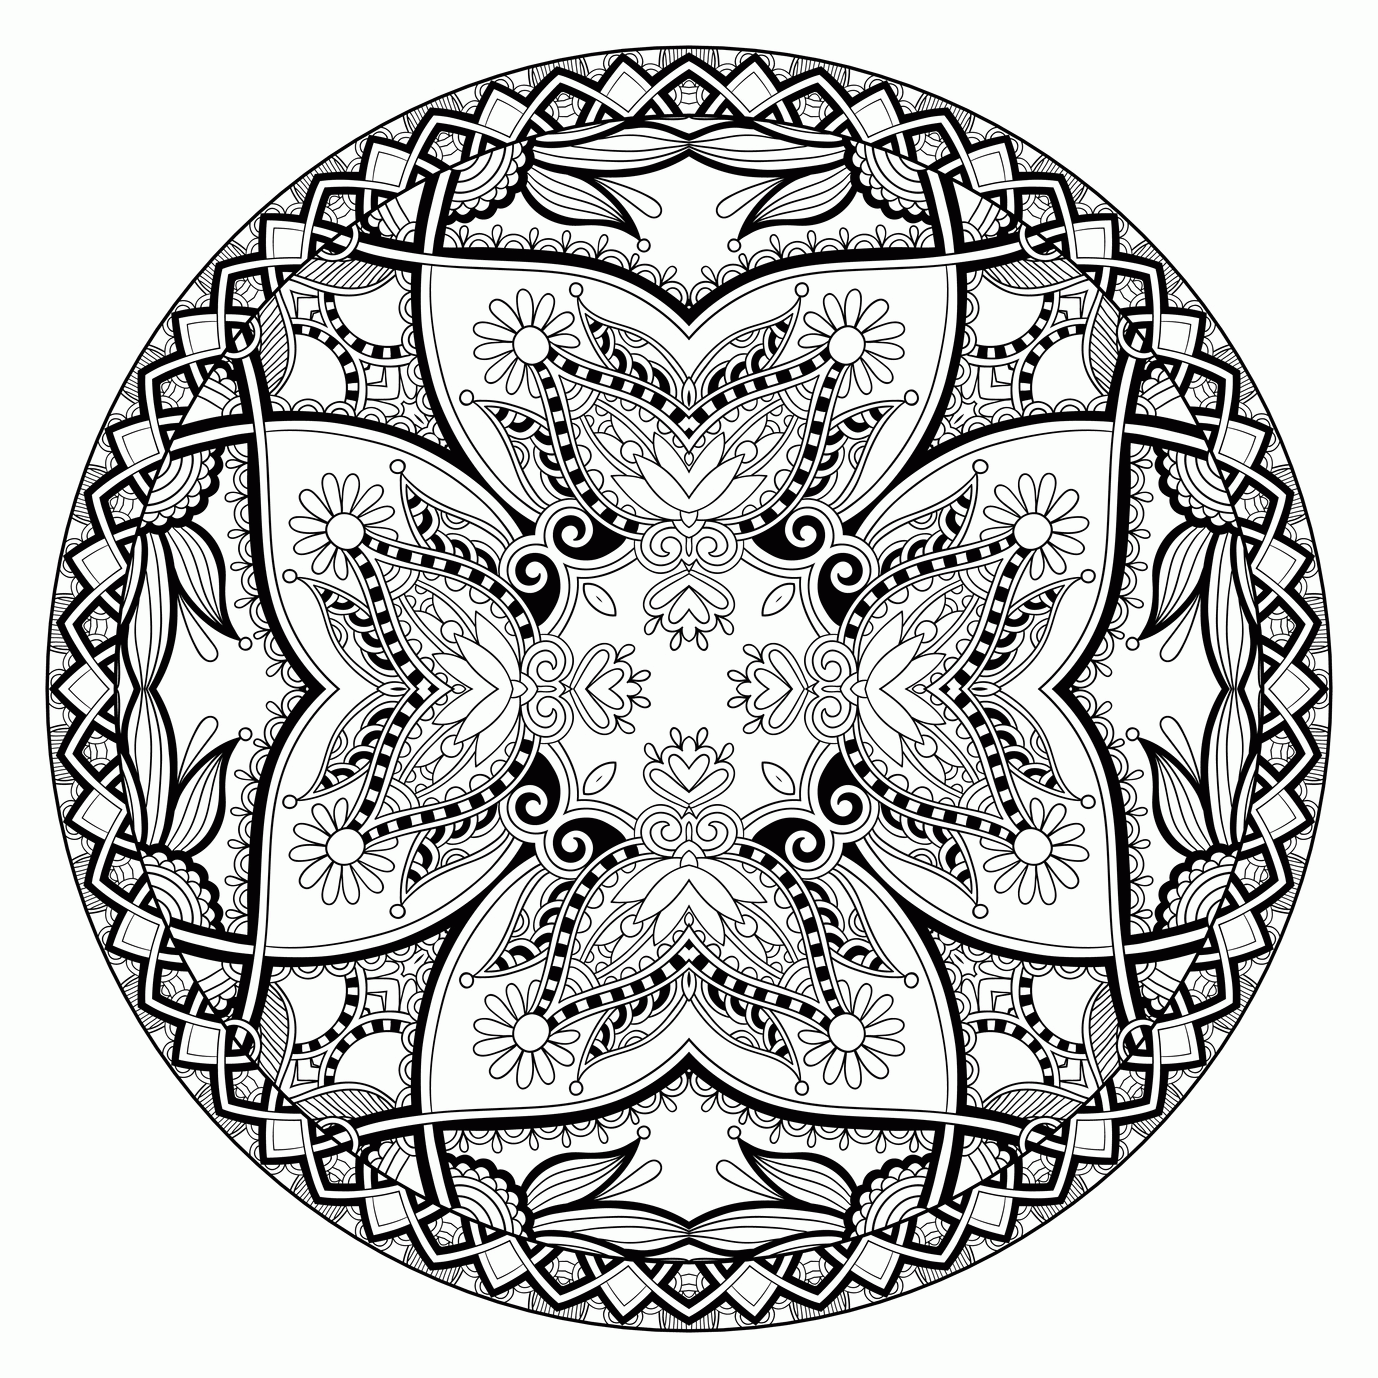 These Printable Abstract Coloring Pages Relieve Stress And Help ...